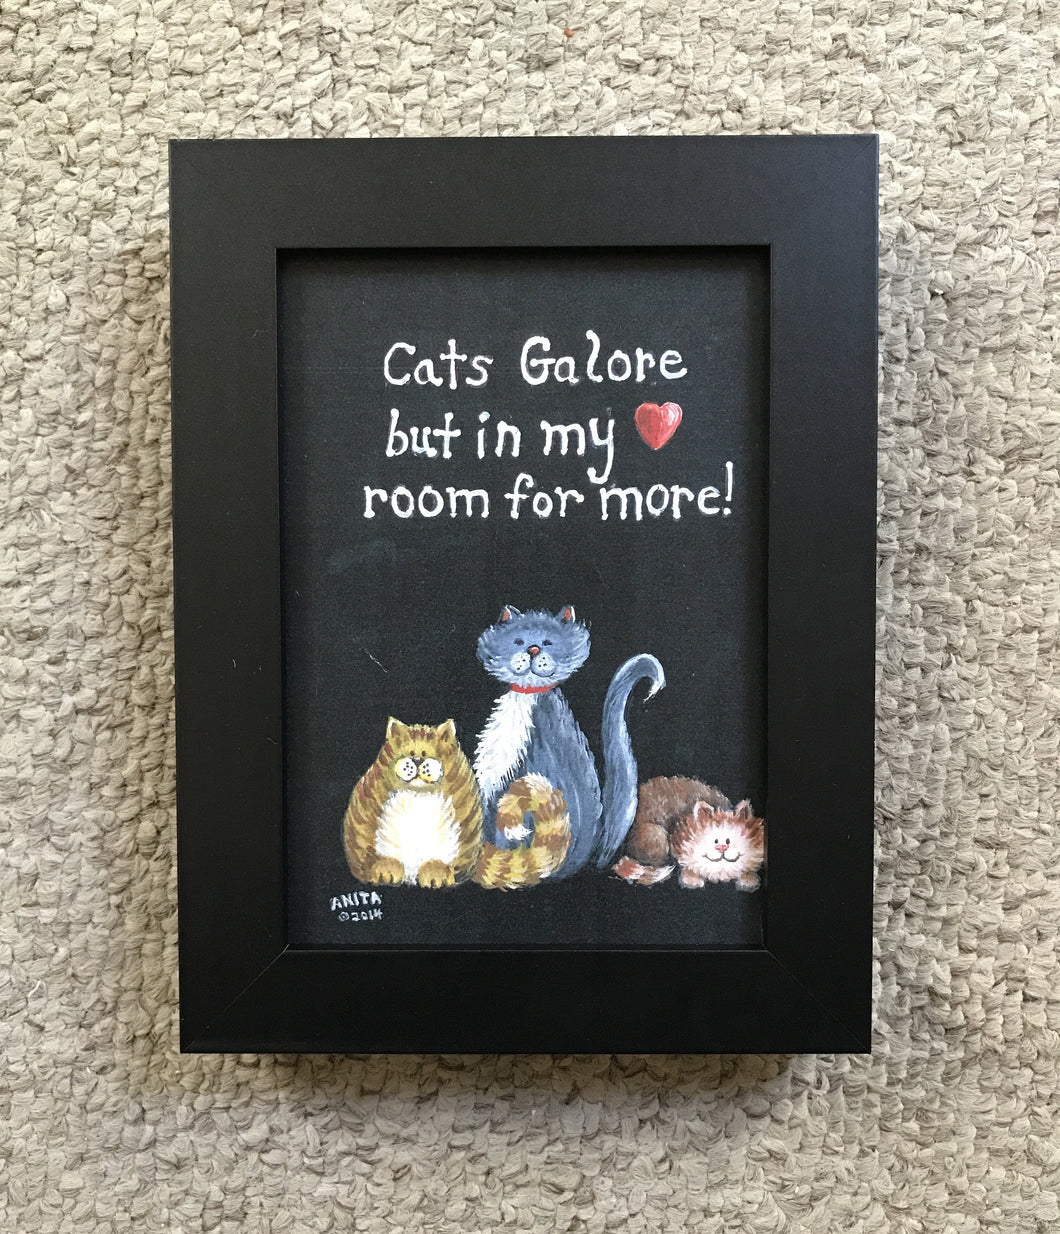 “Cats galore, but in my heart, room for more”